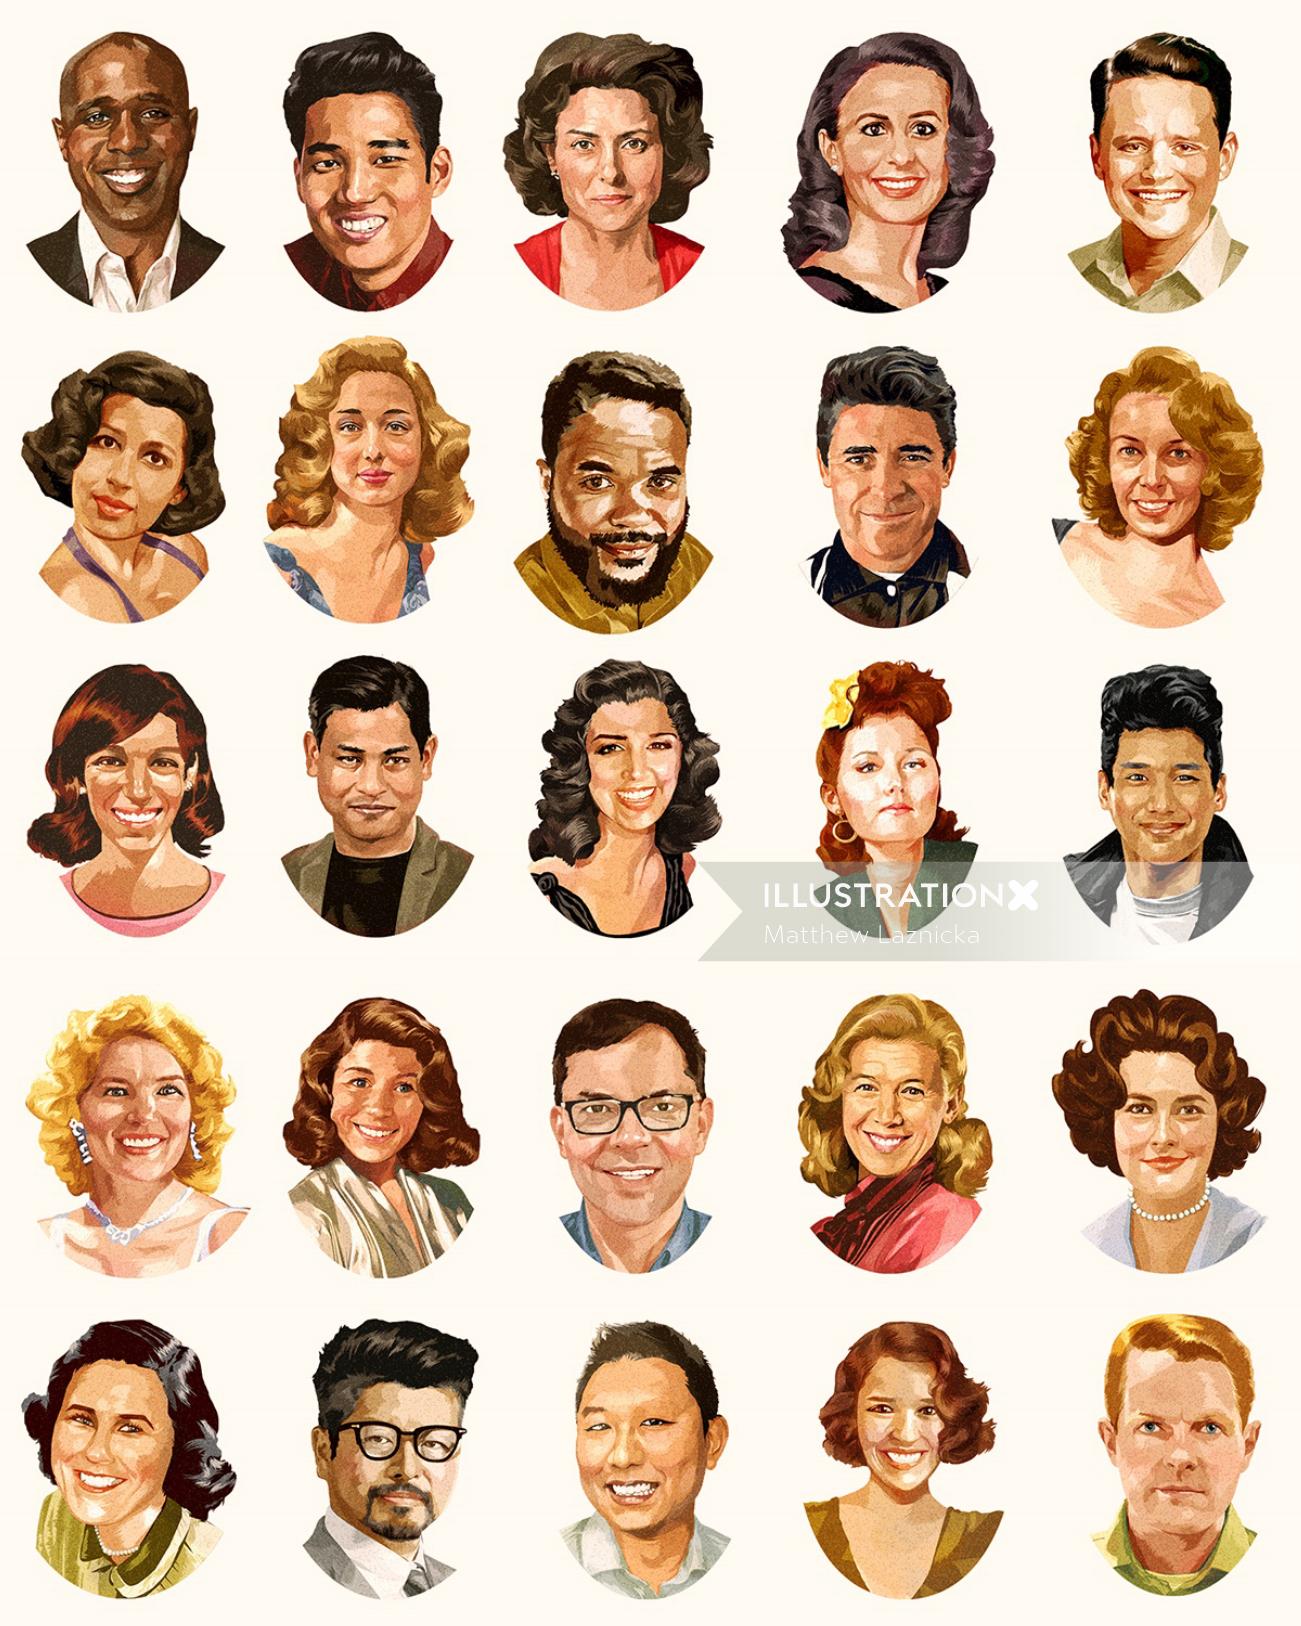 Graphic portraits of celebrity faces